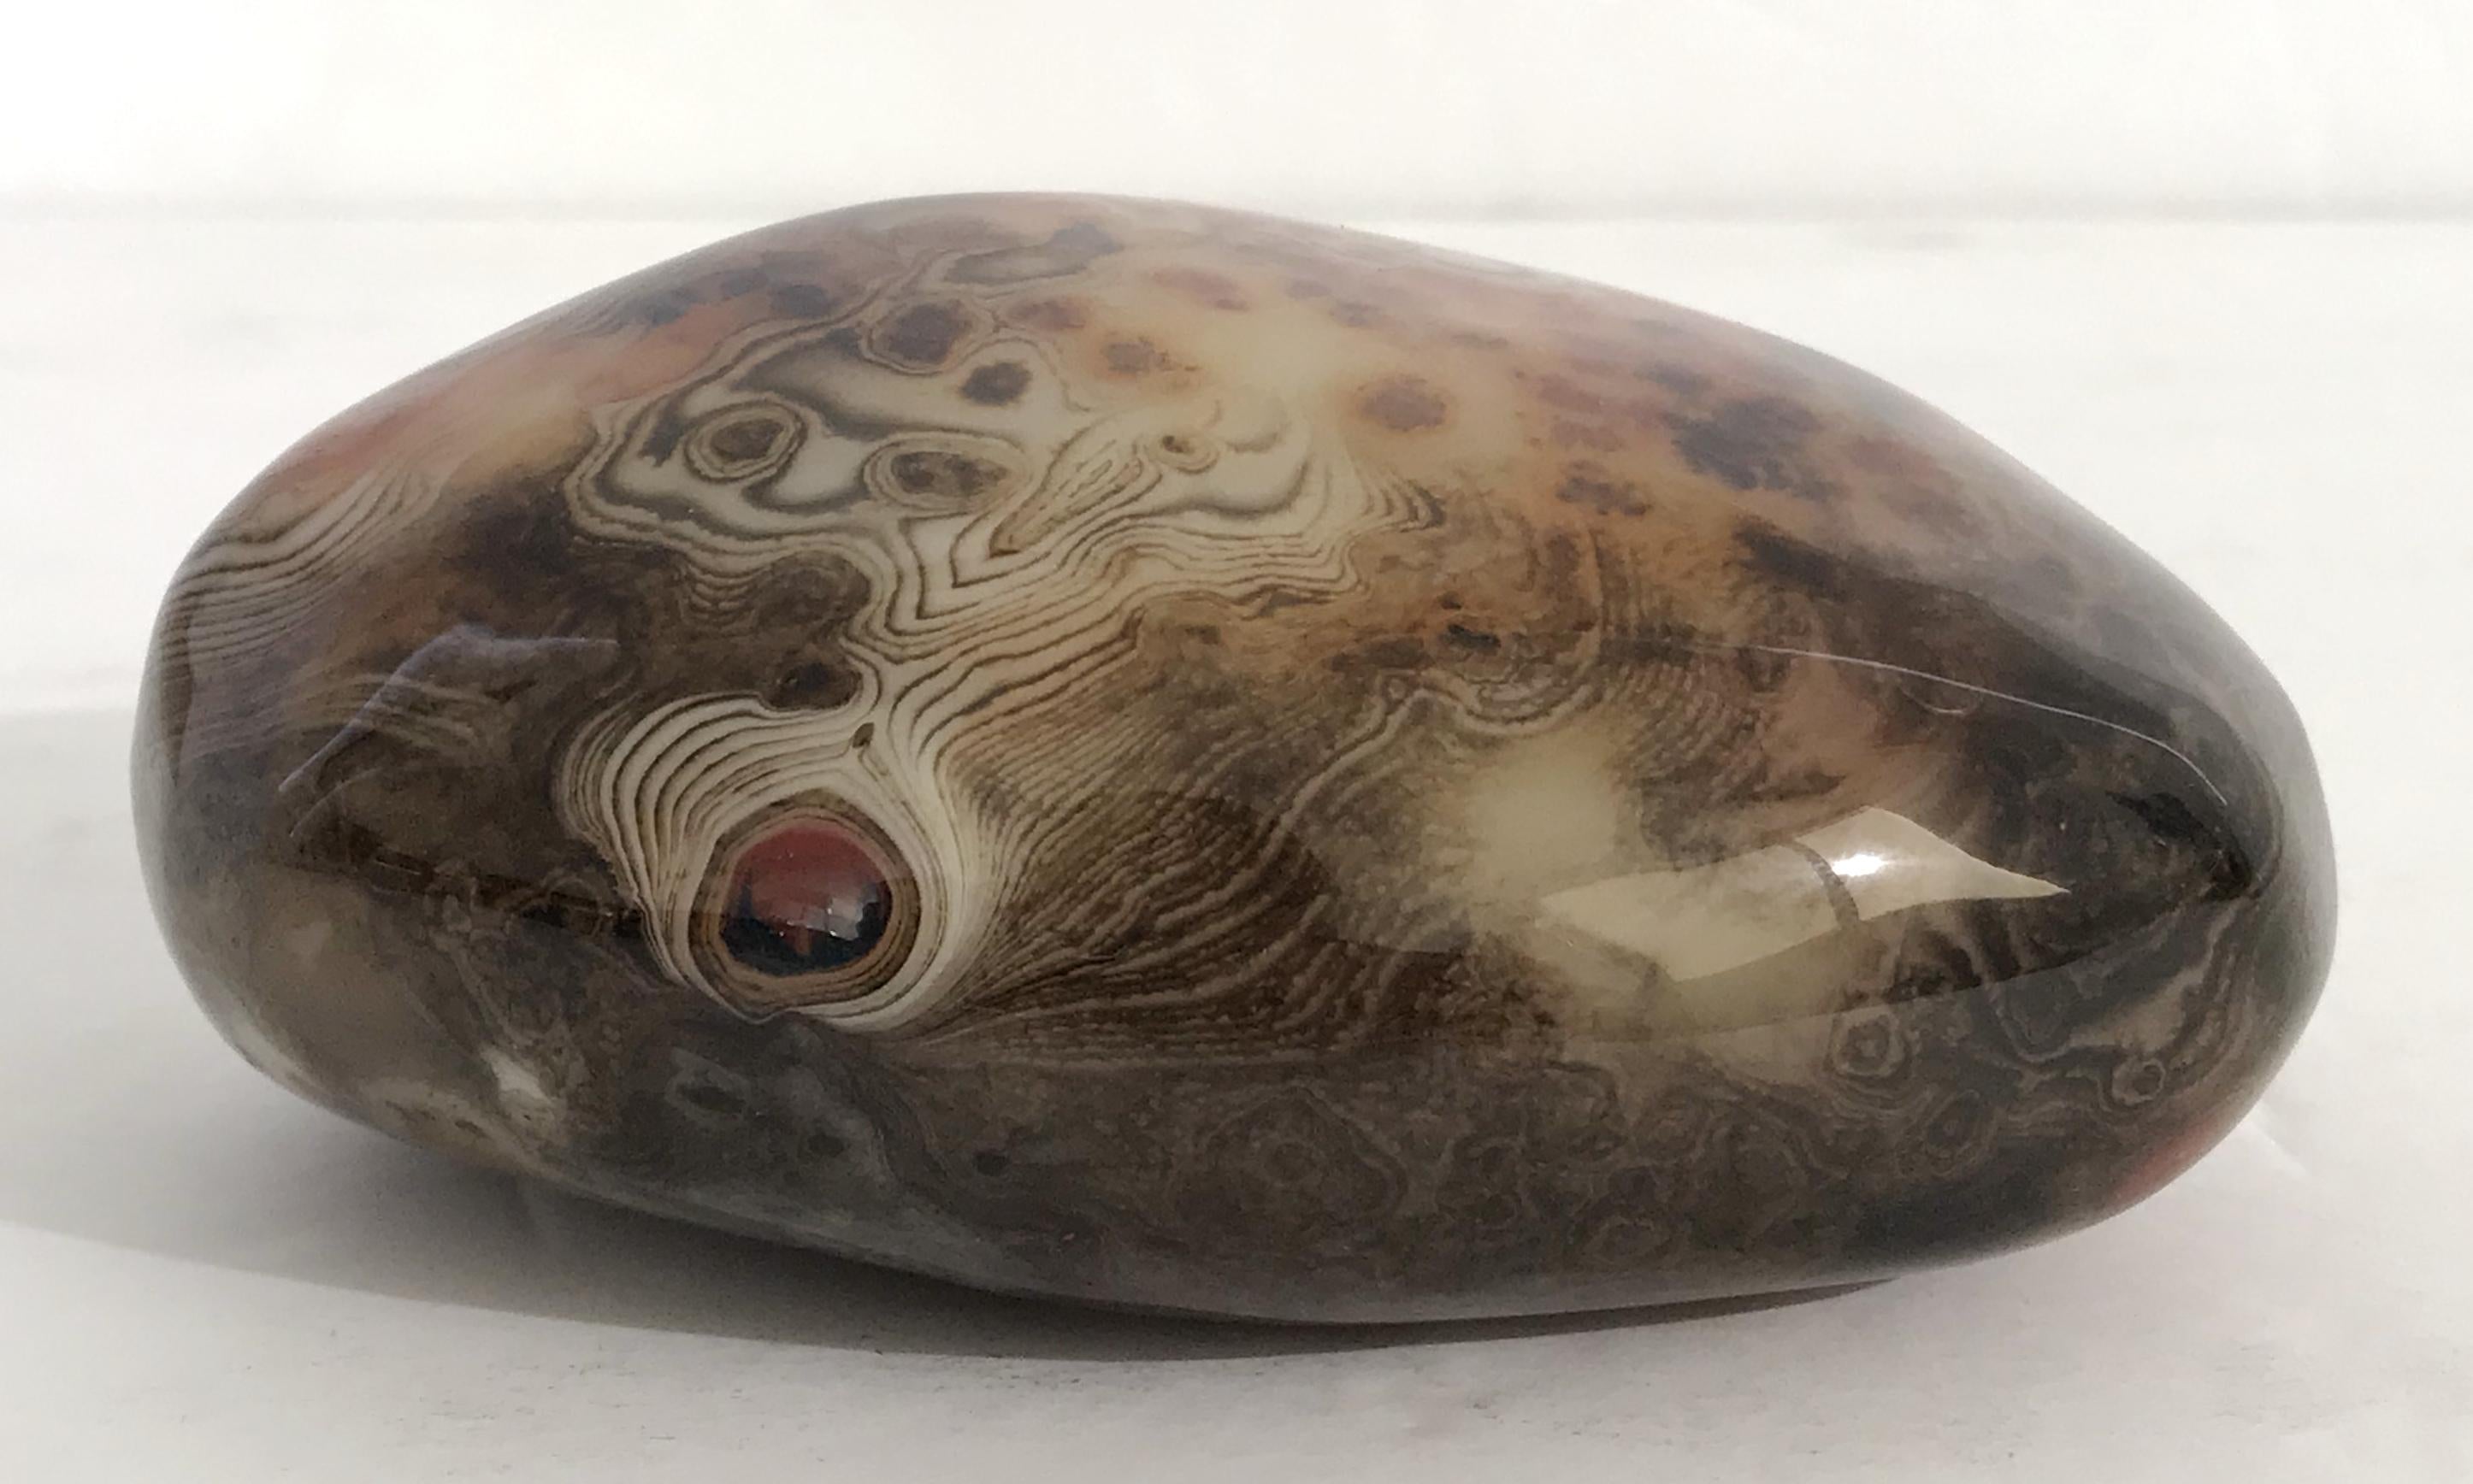 Hand polished agate onyx stone paperweight in black, brown, and red intricate layered patterns
Measures: length 4.5 inches, width 3.5 inches, height 2 inches
1 in stock in Palm Springs ON 50% OFF SALE for $225 !!
This piece makes for a great and